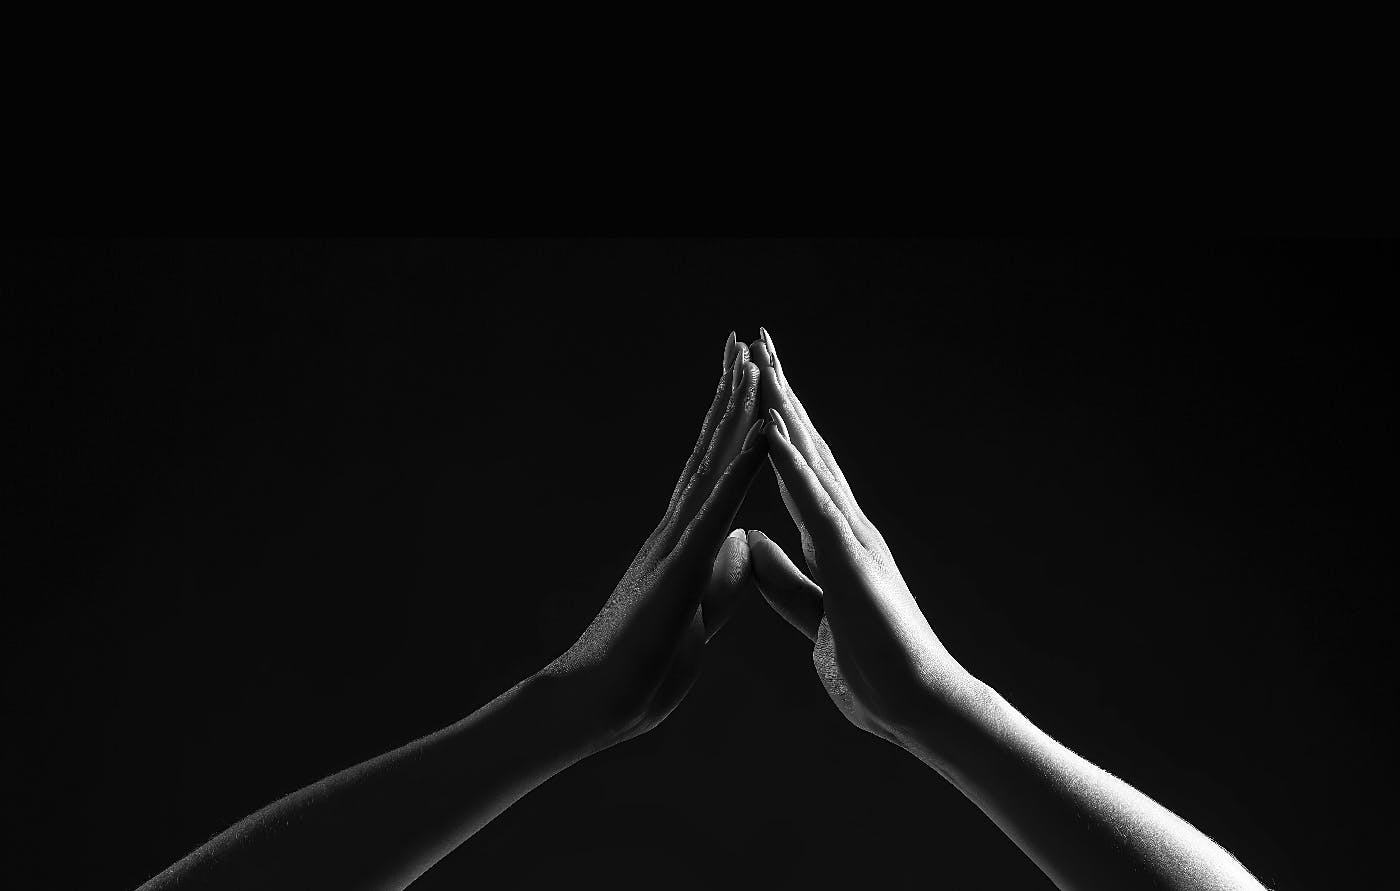 A grey scale image of two women's hands touching in darkness